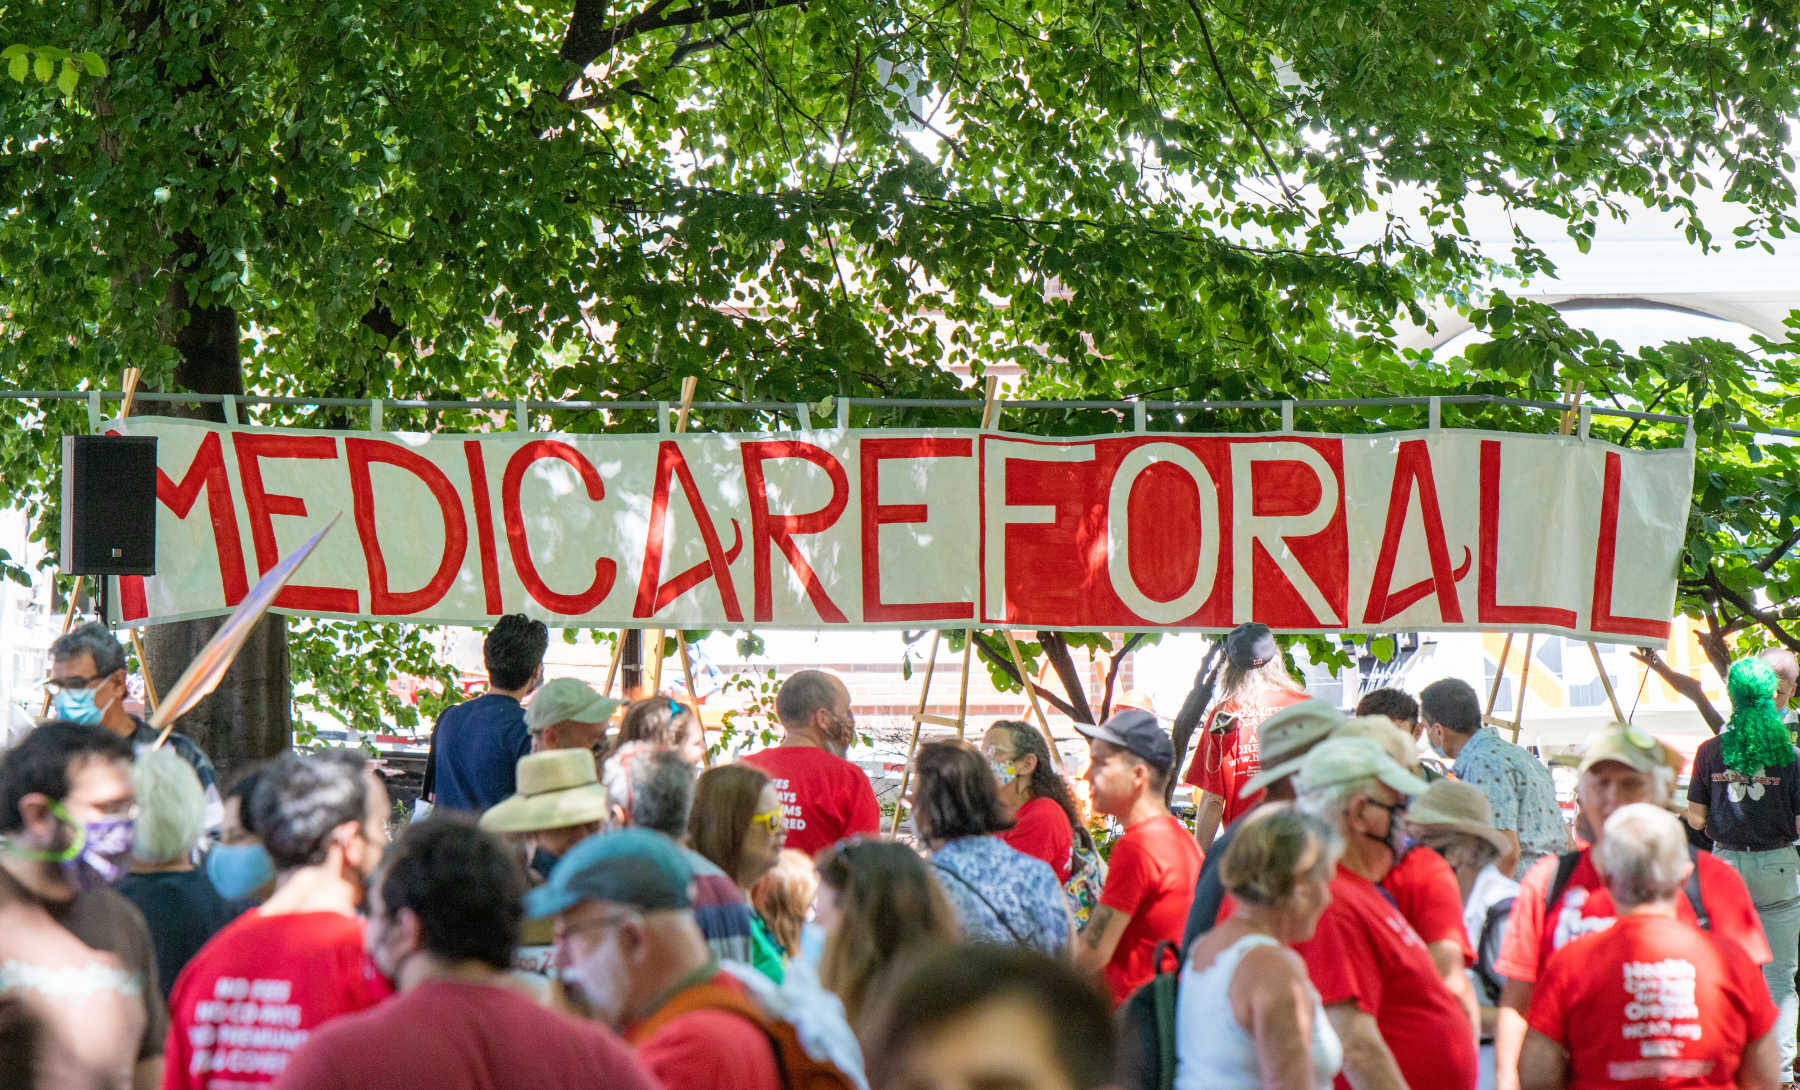 Many people wearing red shirts stand in front of a banner that says Medicare for All.